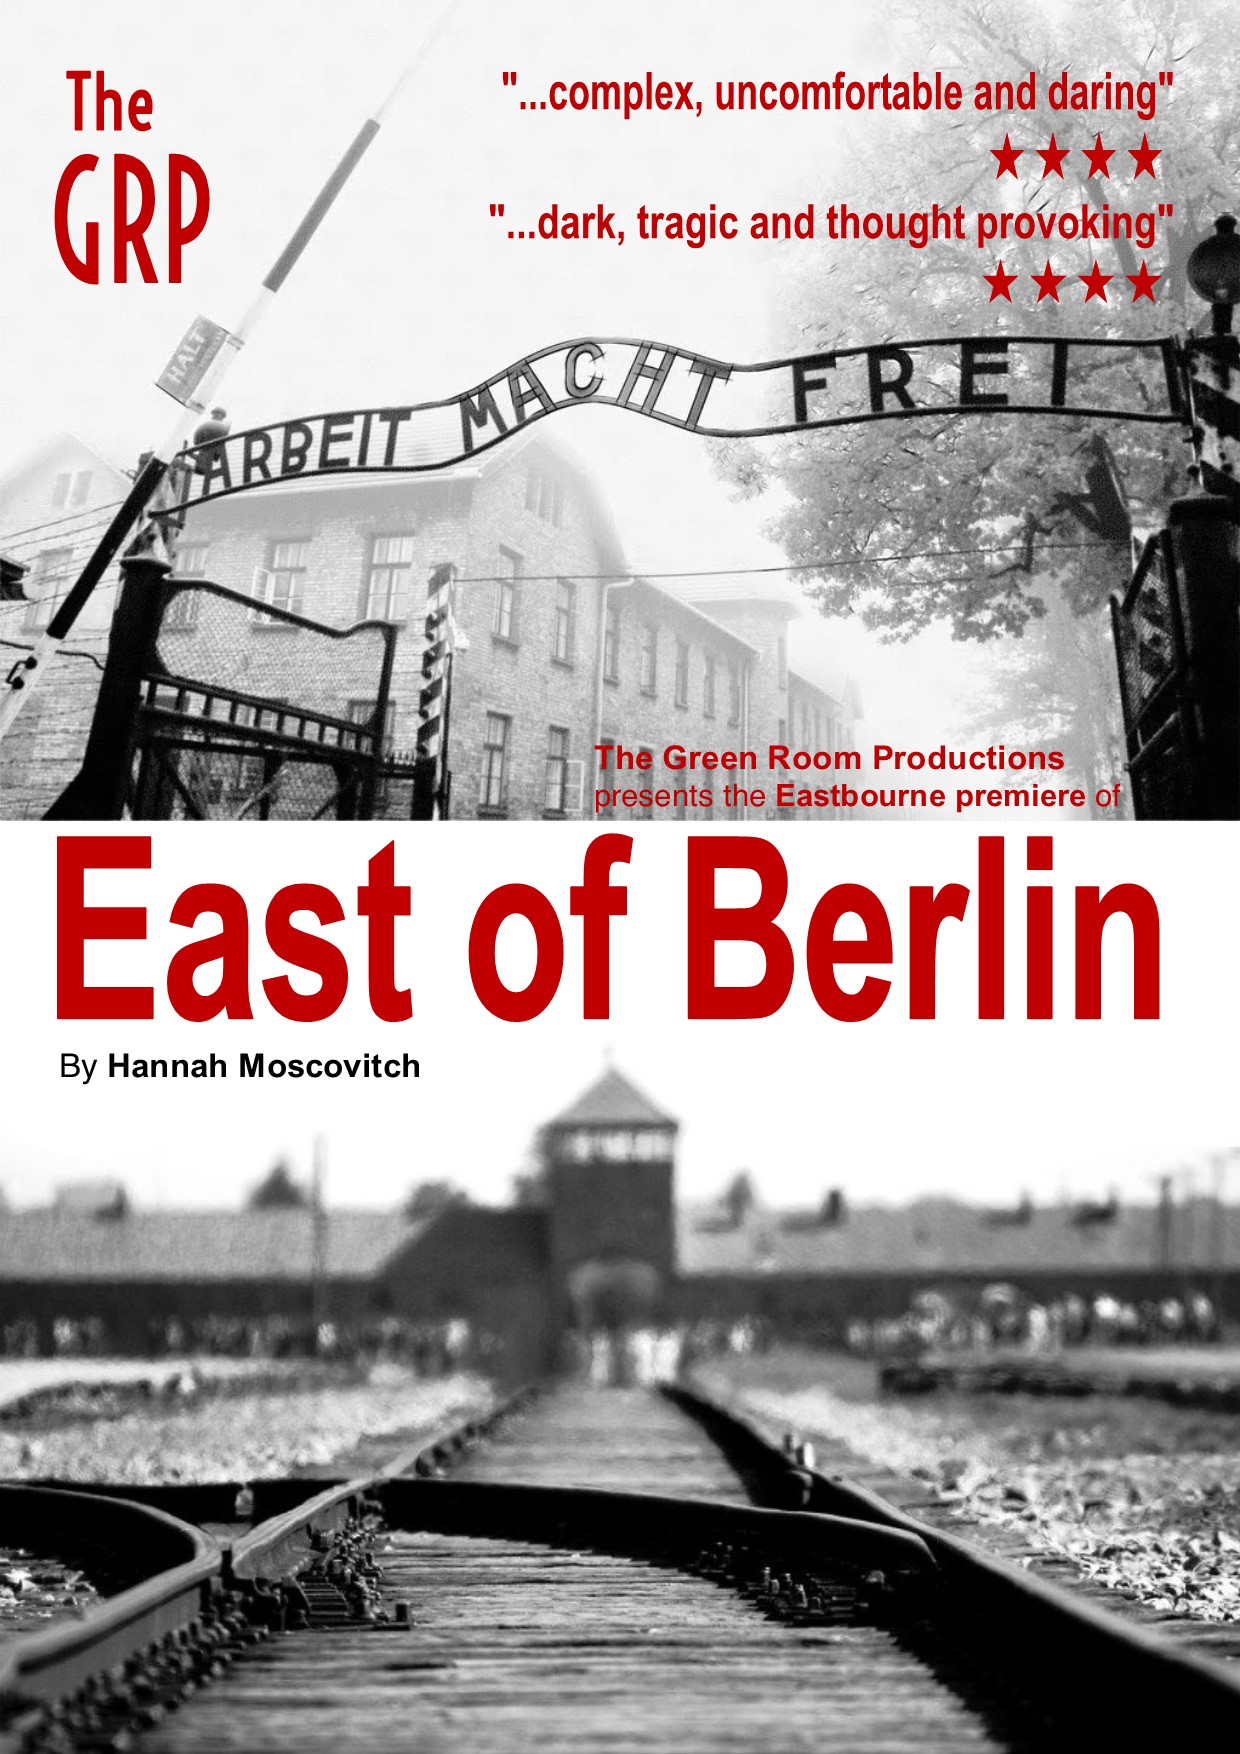 East of Berlin - The Green Room Productions, Eastbourne